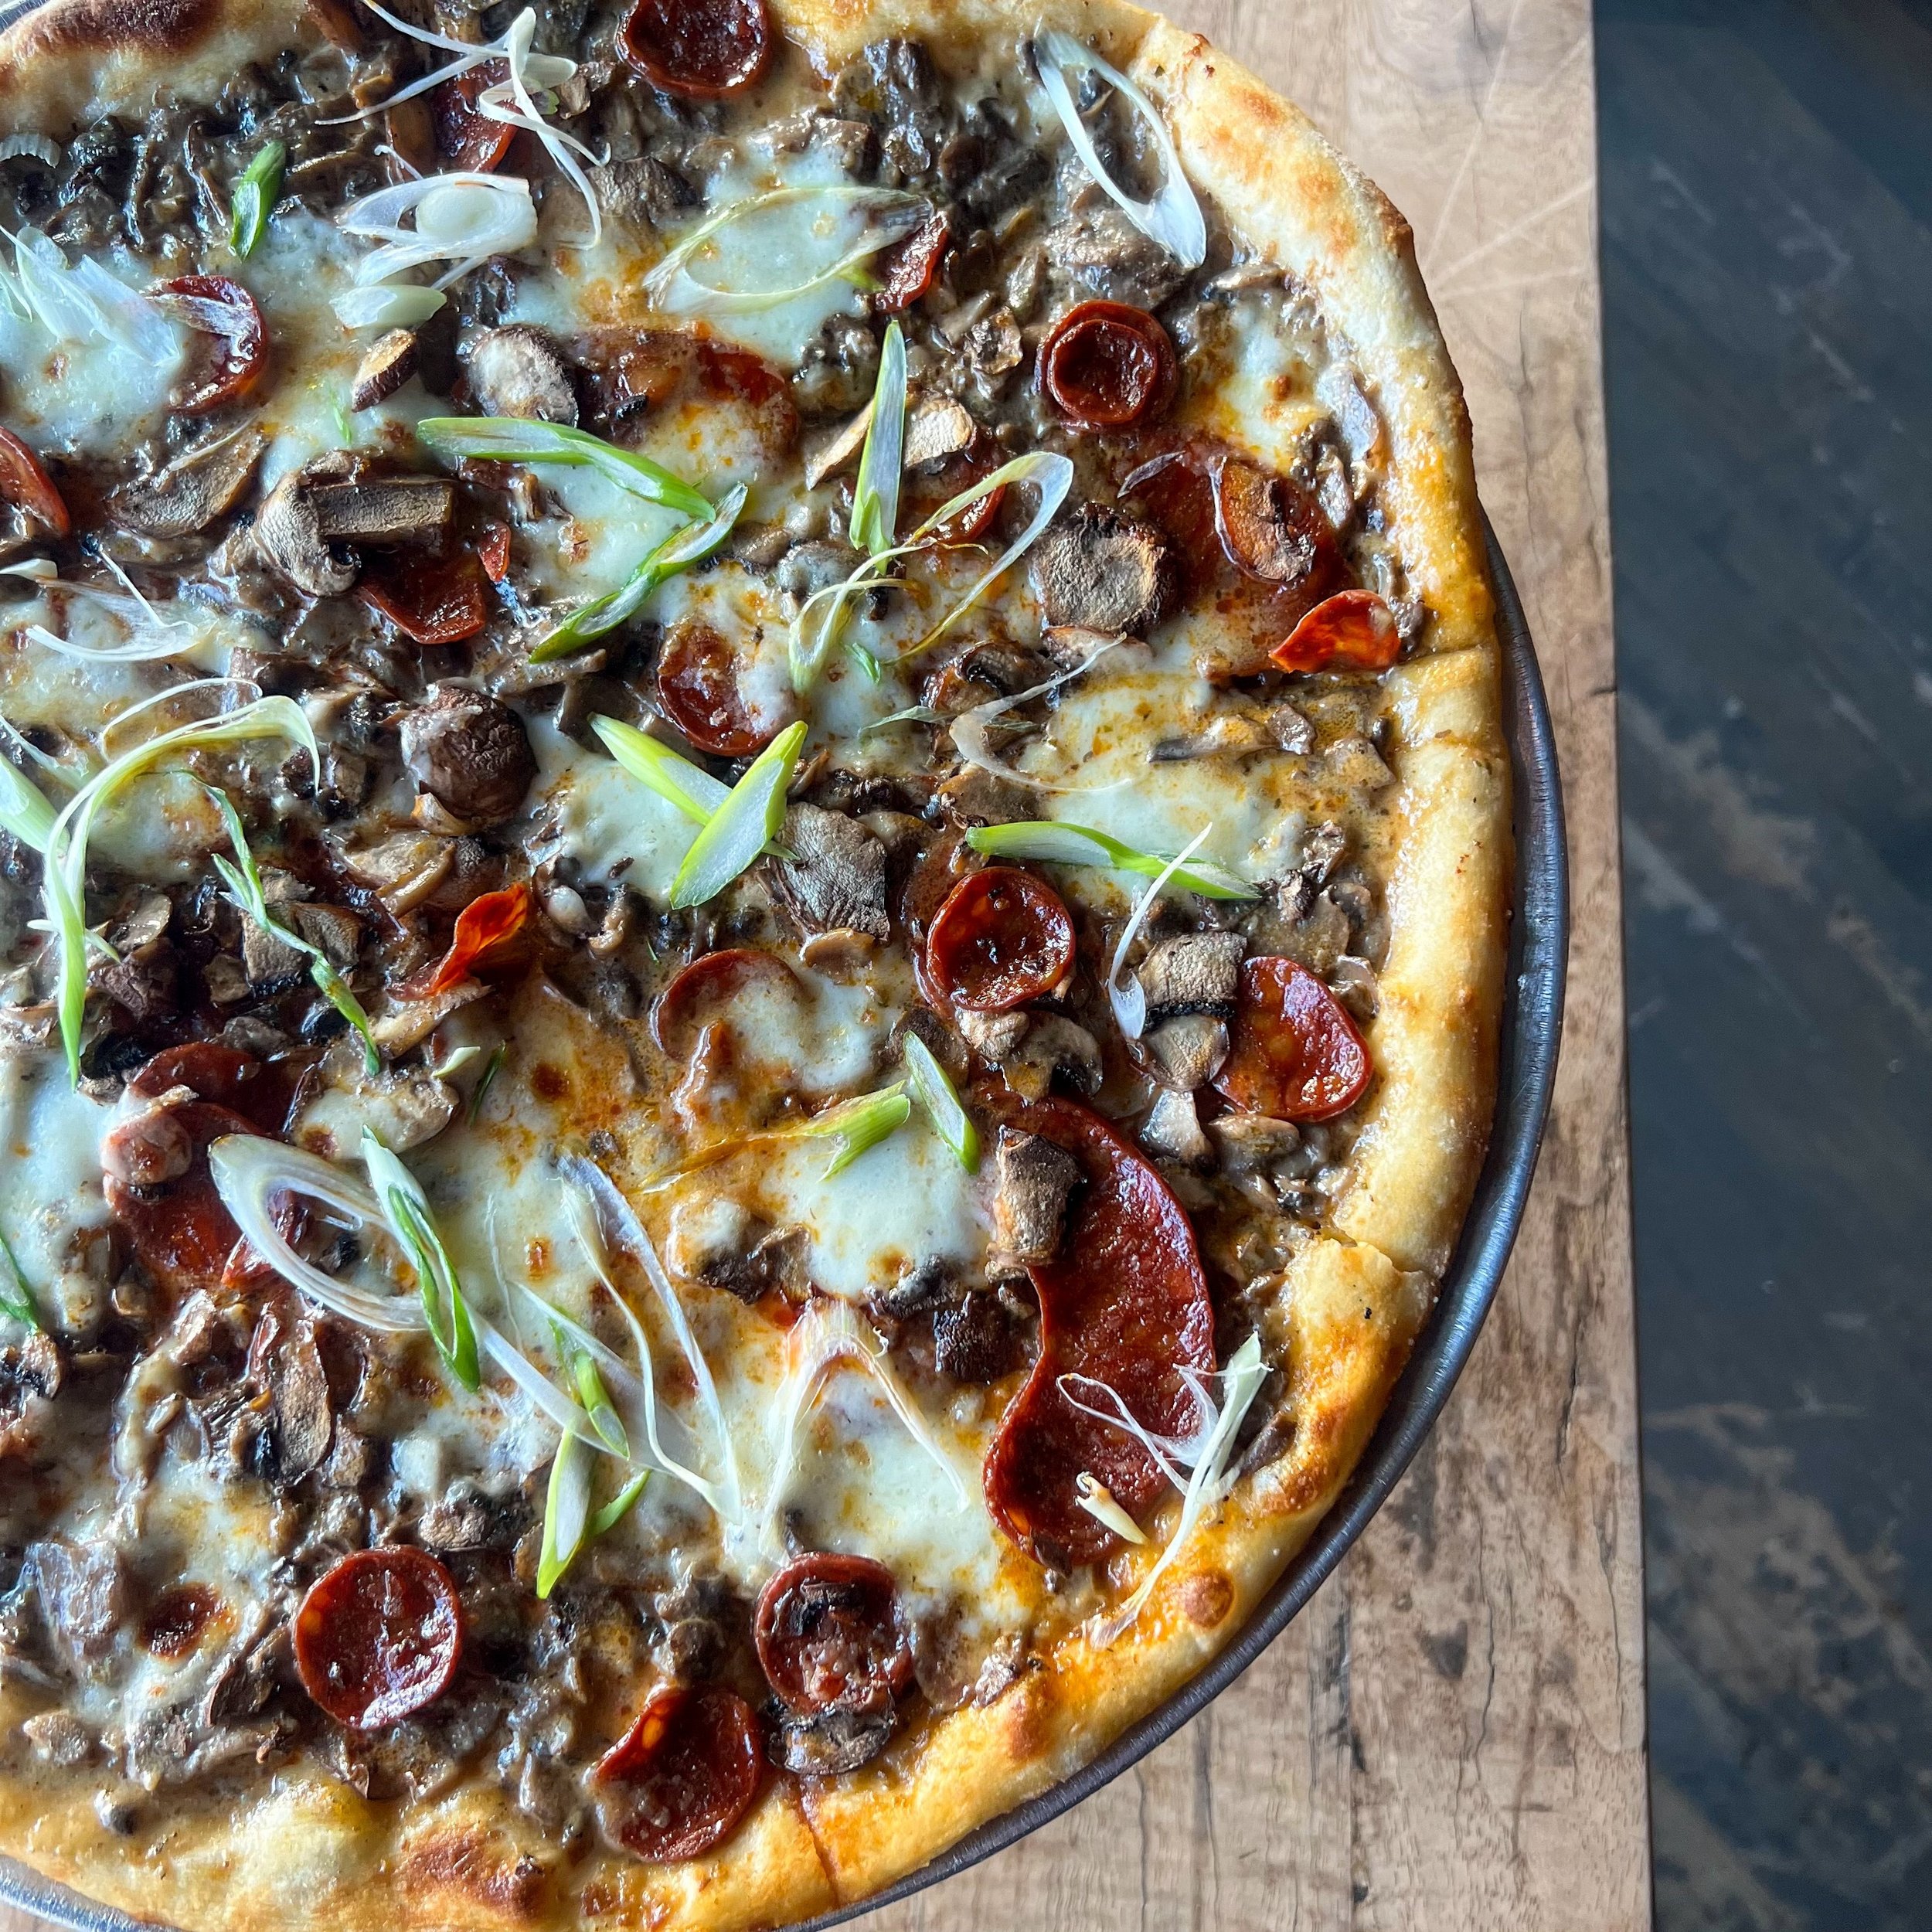 Fun fact - chorizo dates back to the Roman Empire.  It&rsquo;s also really good on pizza when paired with cremini mushroom, mushroom duxelle, scallion &amp; mozzarella. Happy weekend y&rsquo;all! 💃🏻